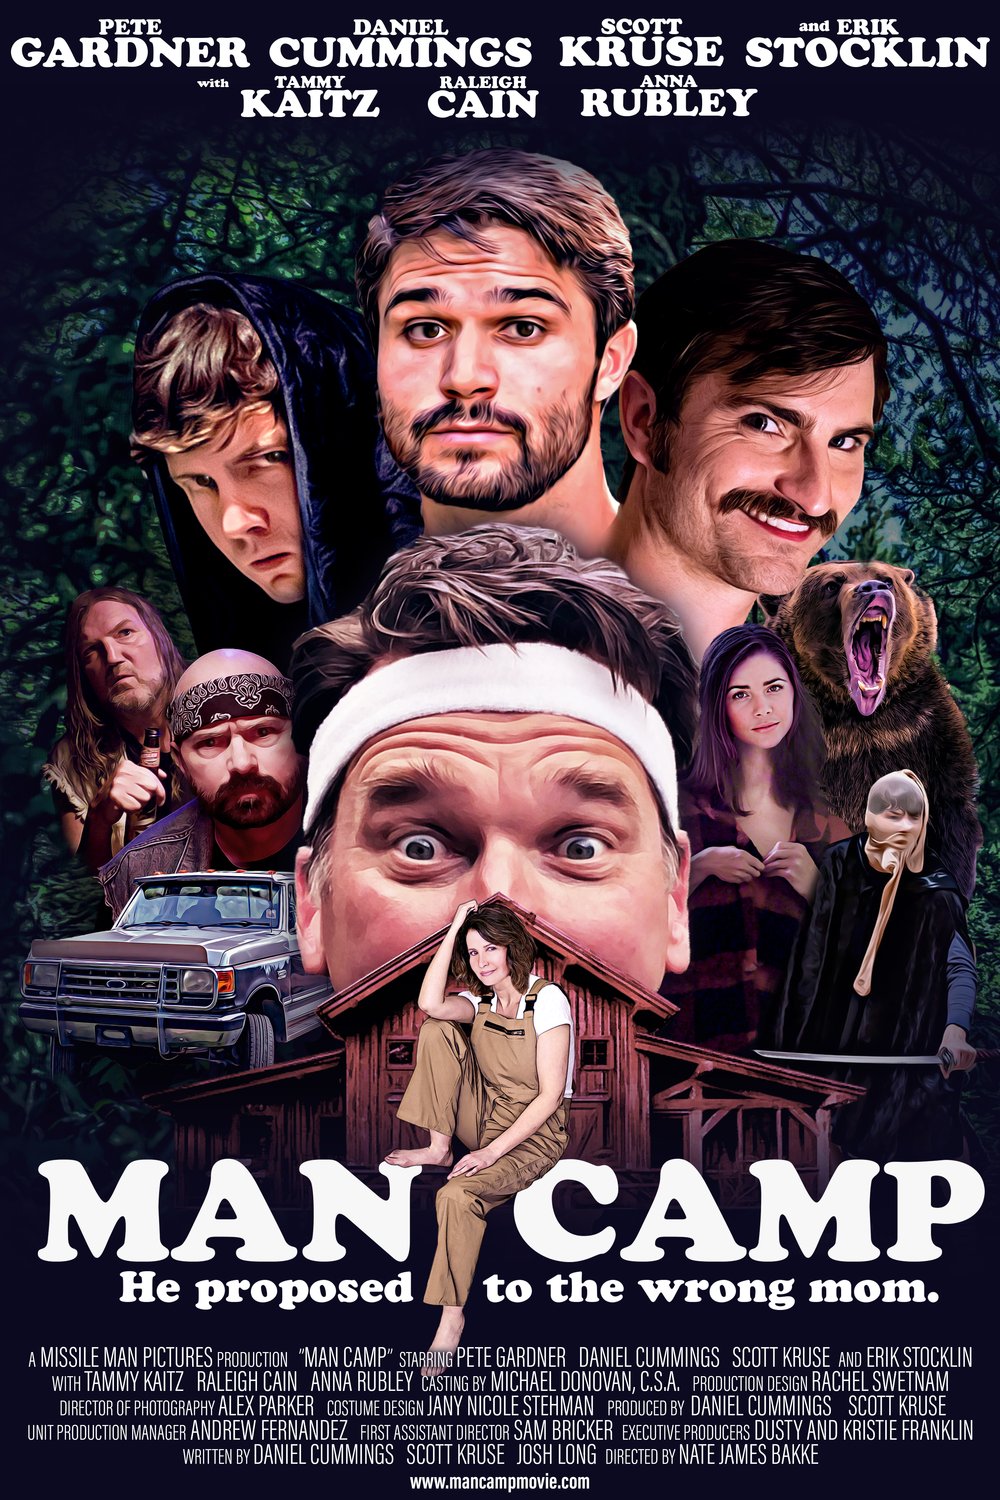 Poster of the movie Man Camp